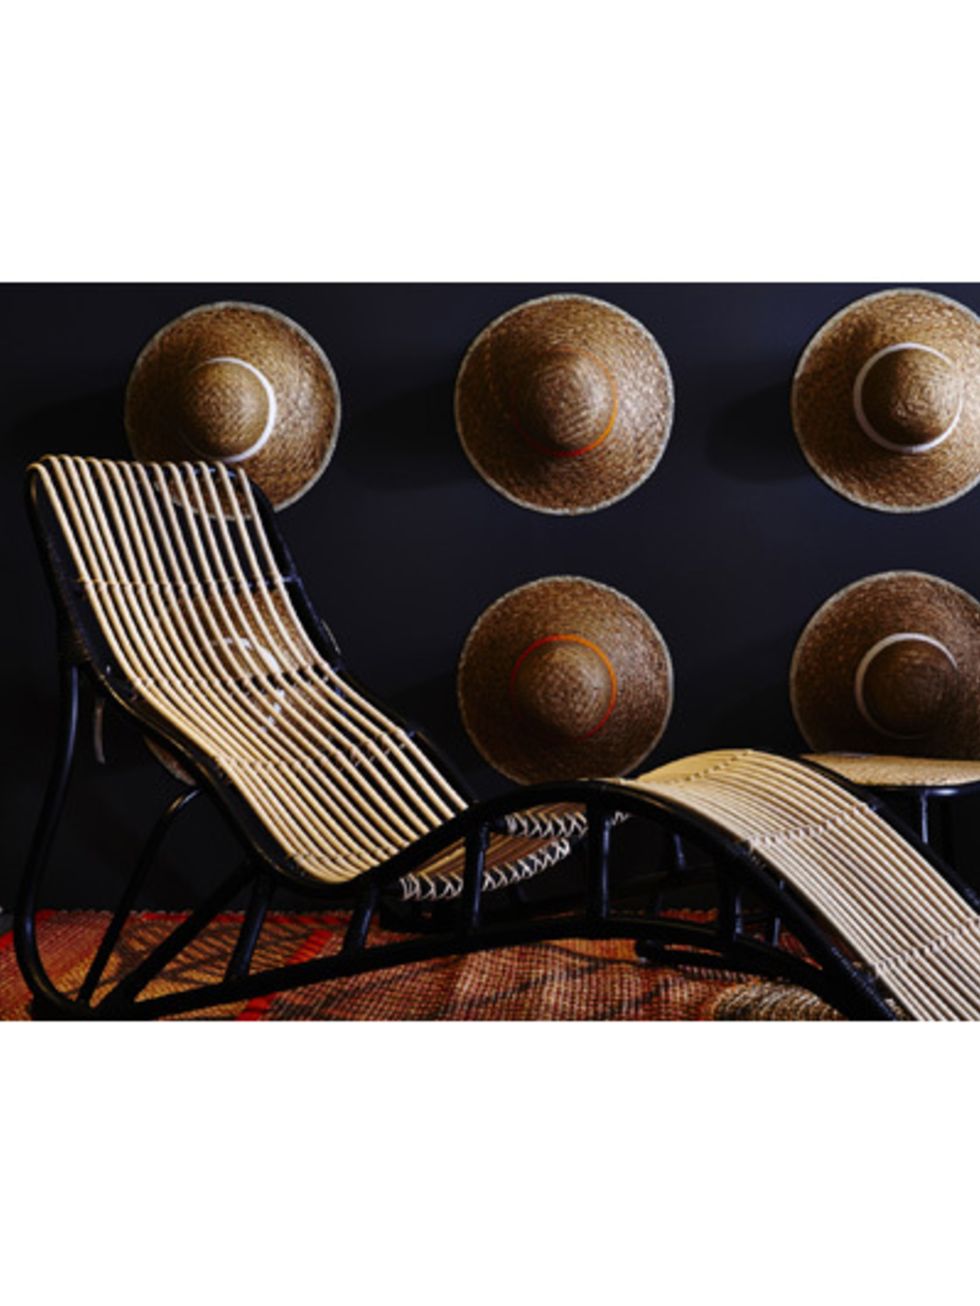 Brown, Wood, Tan, Natural material, Beige, Still life photography, Outdoor furniture, Wicker, Bronze, 